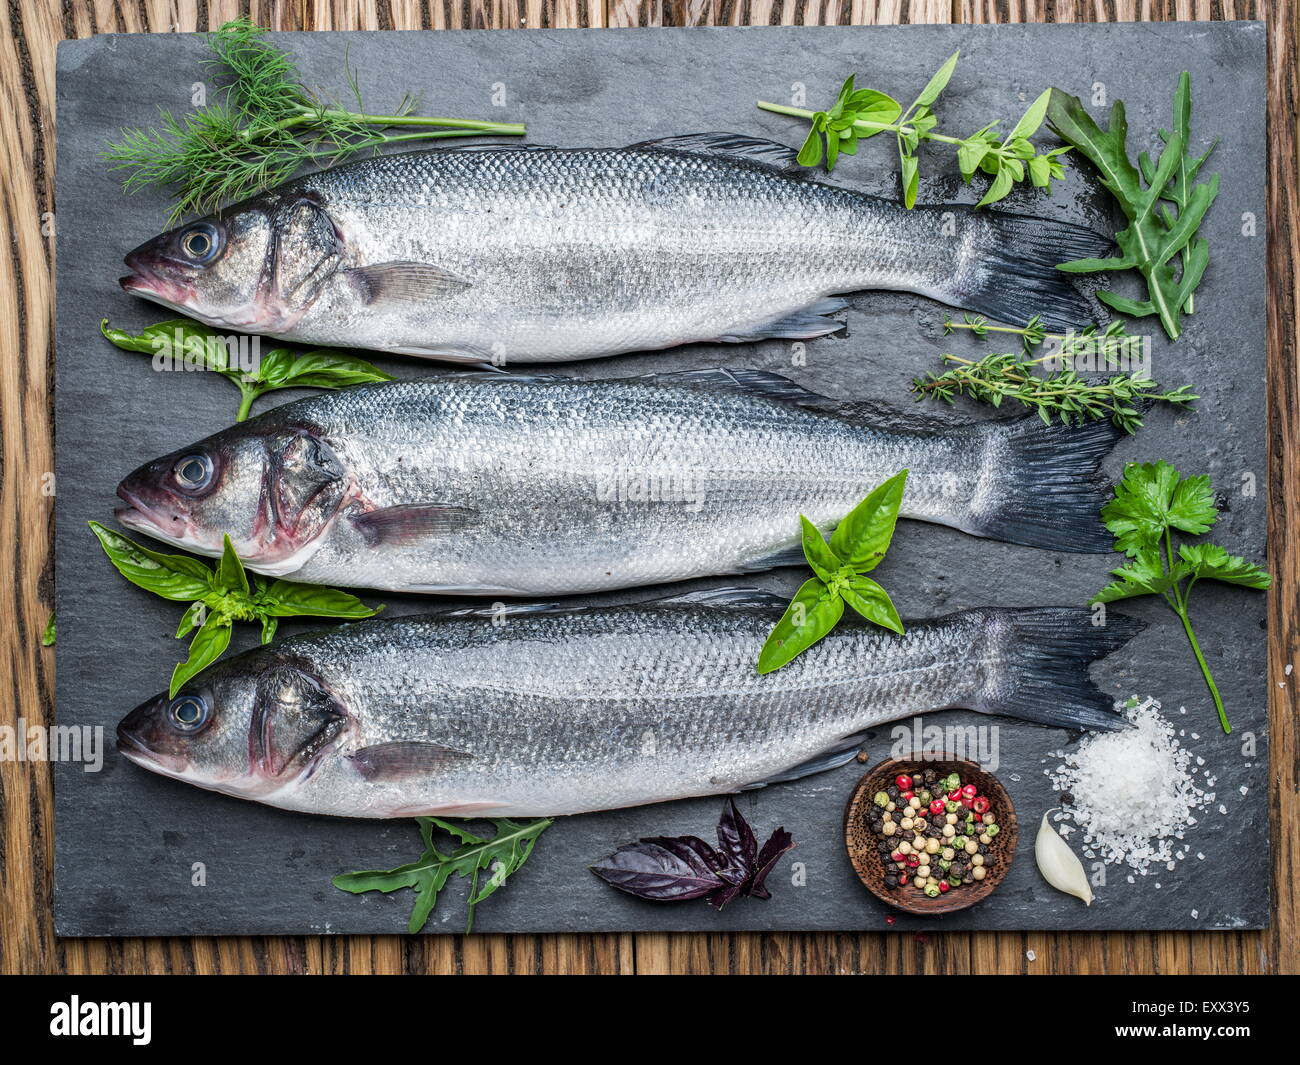 Three fish - sea bass on a graphite board with spices and herbs. Stock Photo